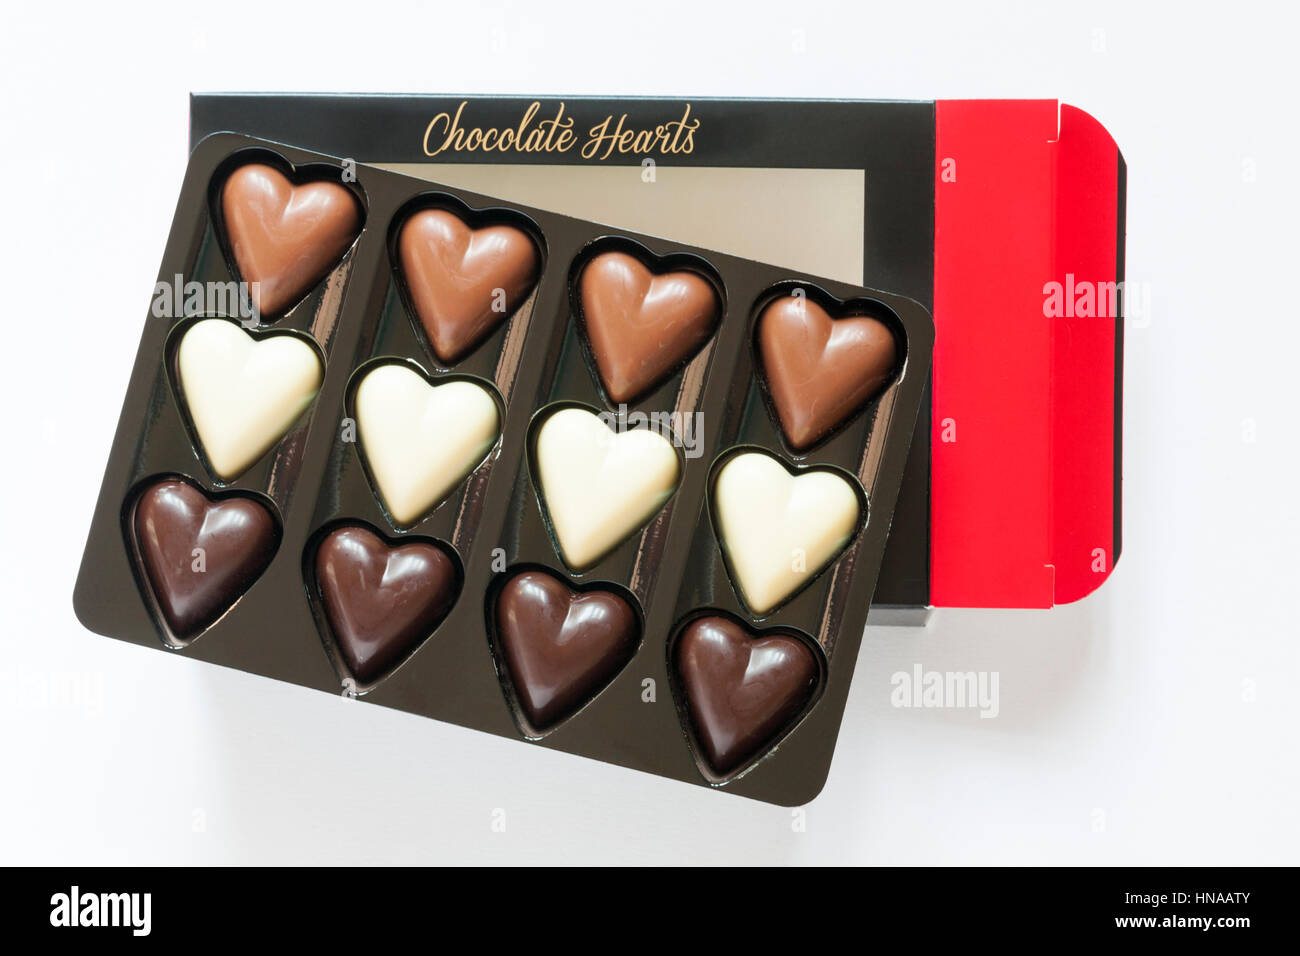 Chocolate Hearts chocolates in pack containing dark chocolate, milk chocolate and white chocolate hearts, with box isolated on white background Stock Photo